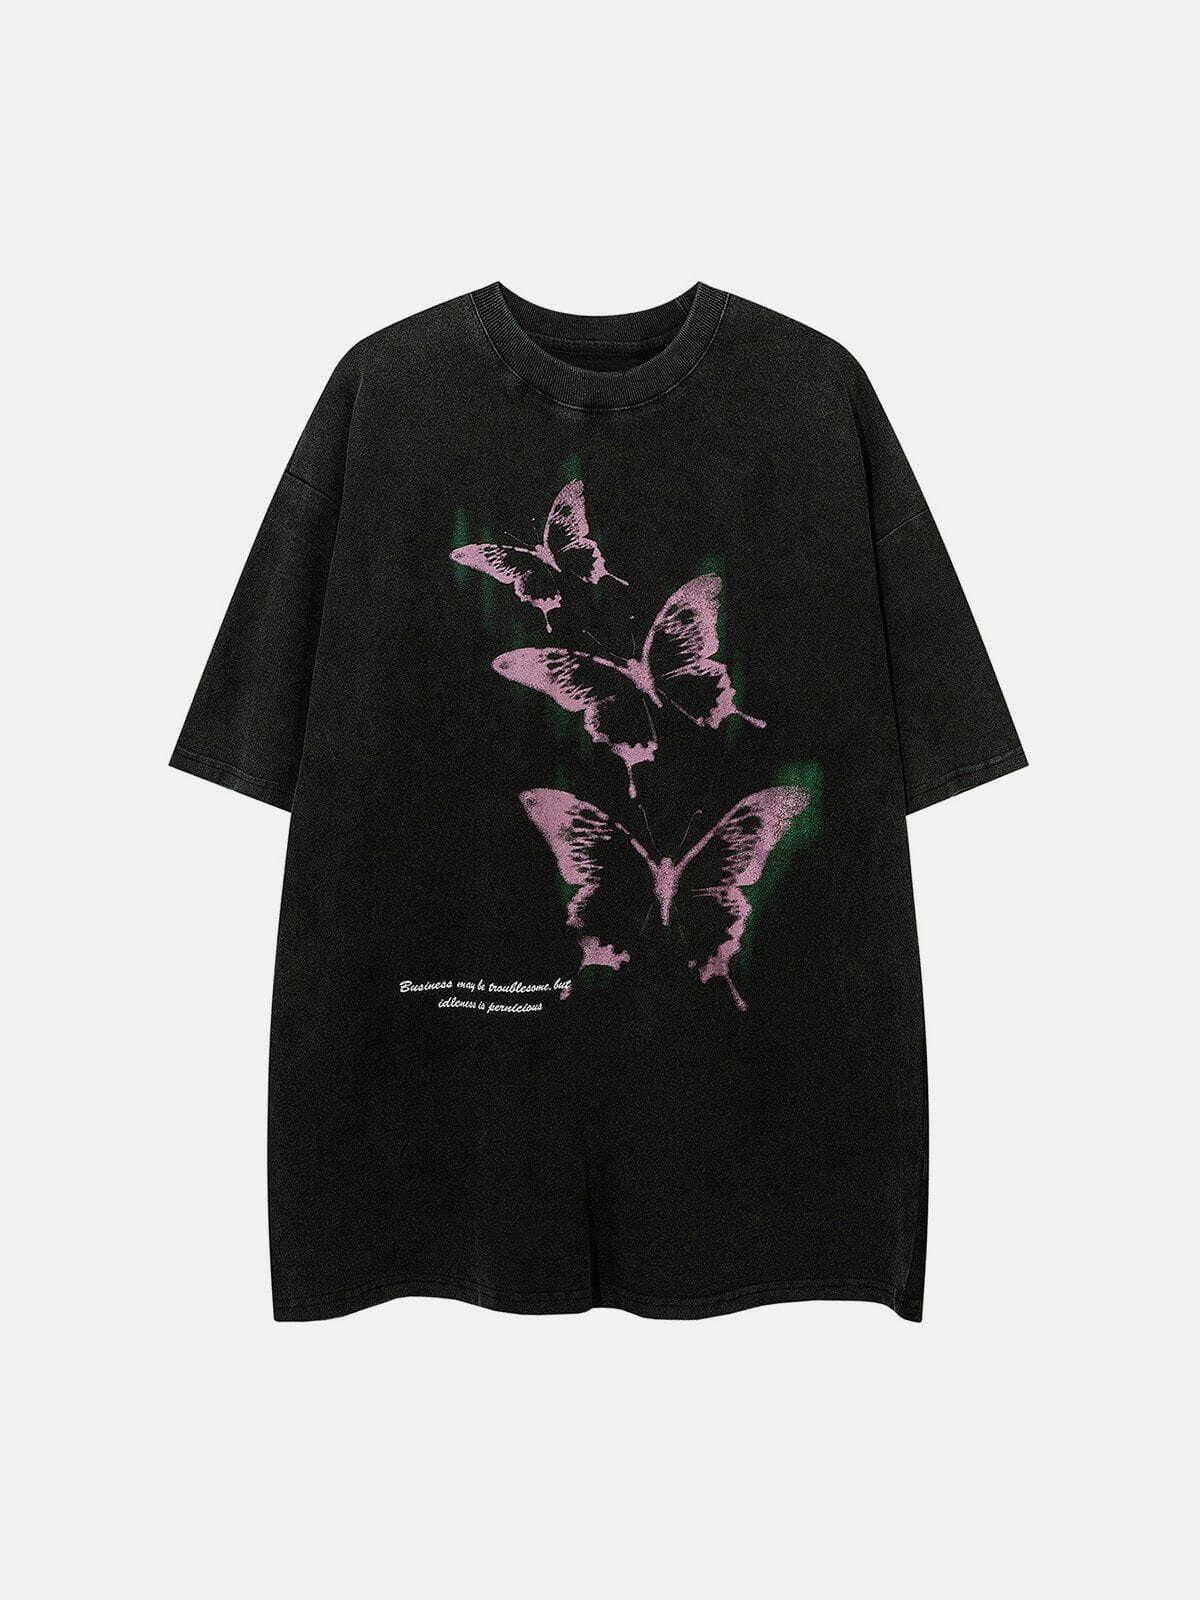 youthful washed butterfly tee retro streetwear top 4272